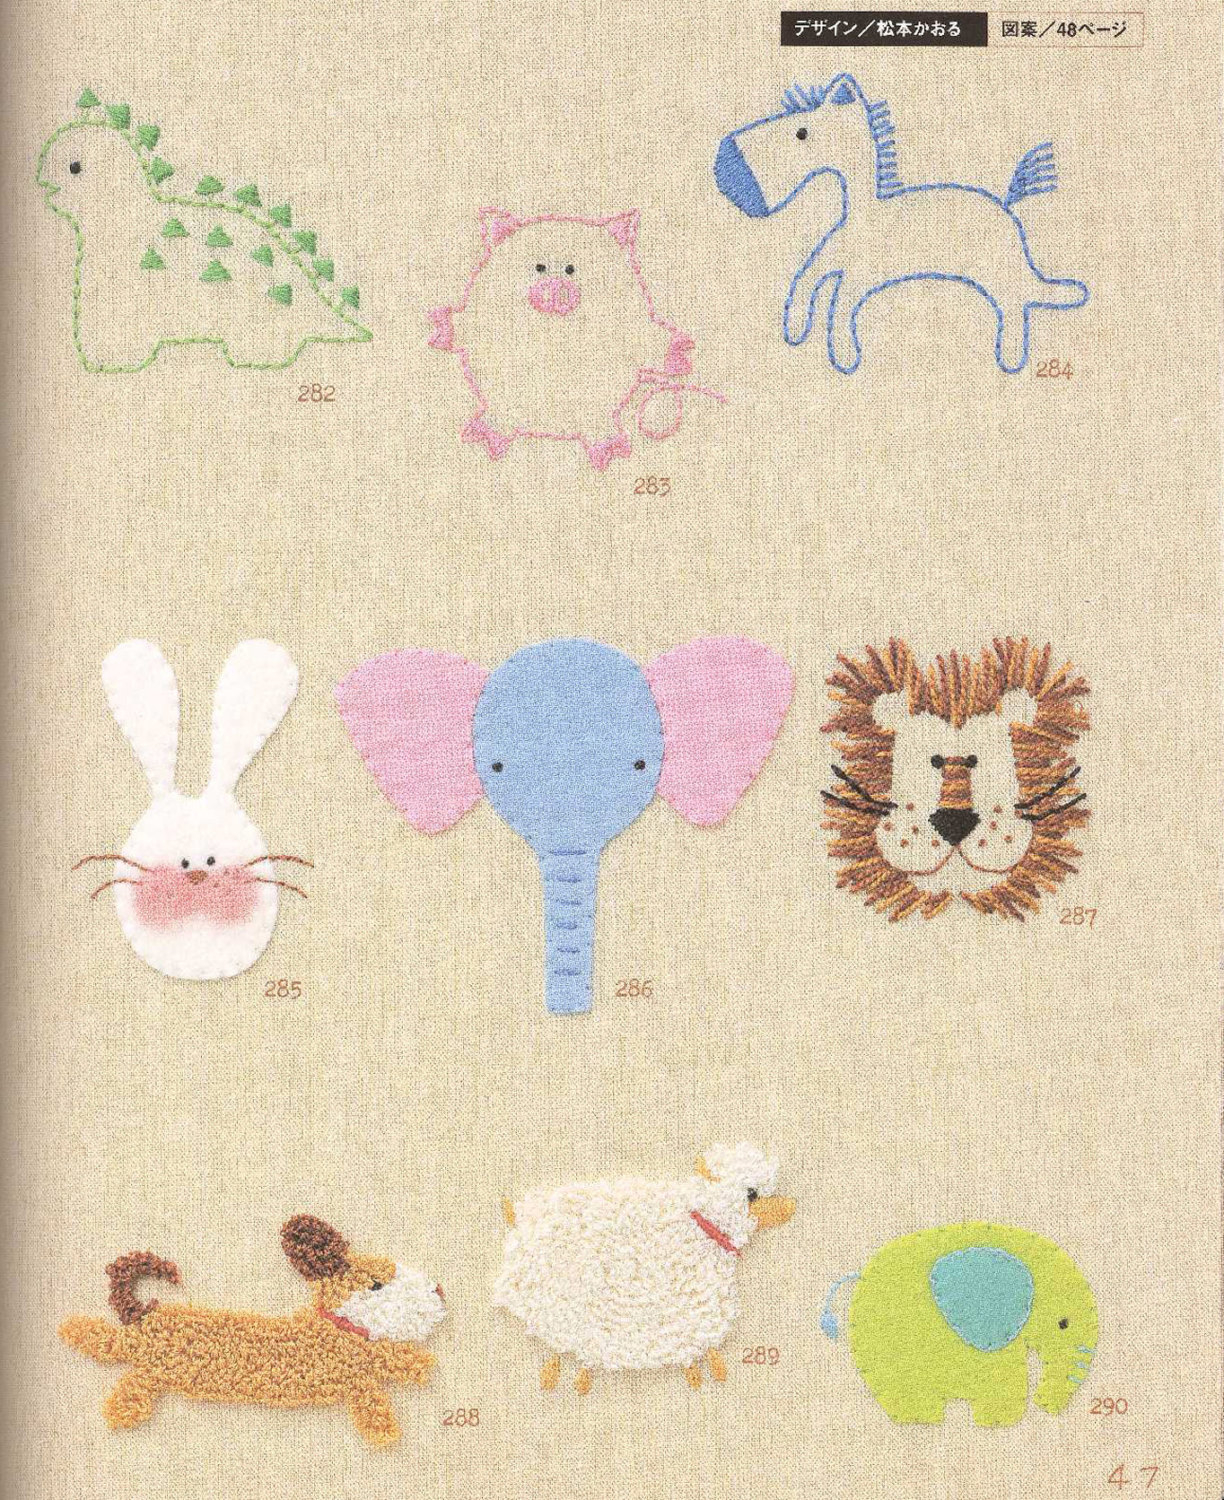 Japanese Embroidery Patterns 365 Hand Embroidery Patterns For Kids Japanese Embroidery Embroidery Book Easy Embroidery Ebook Pattern Pdf Instant Download